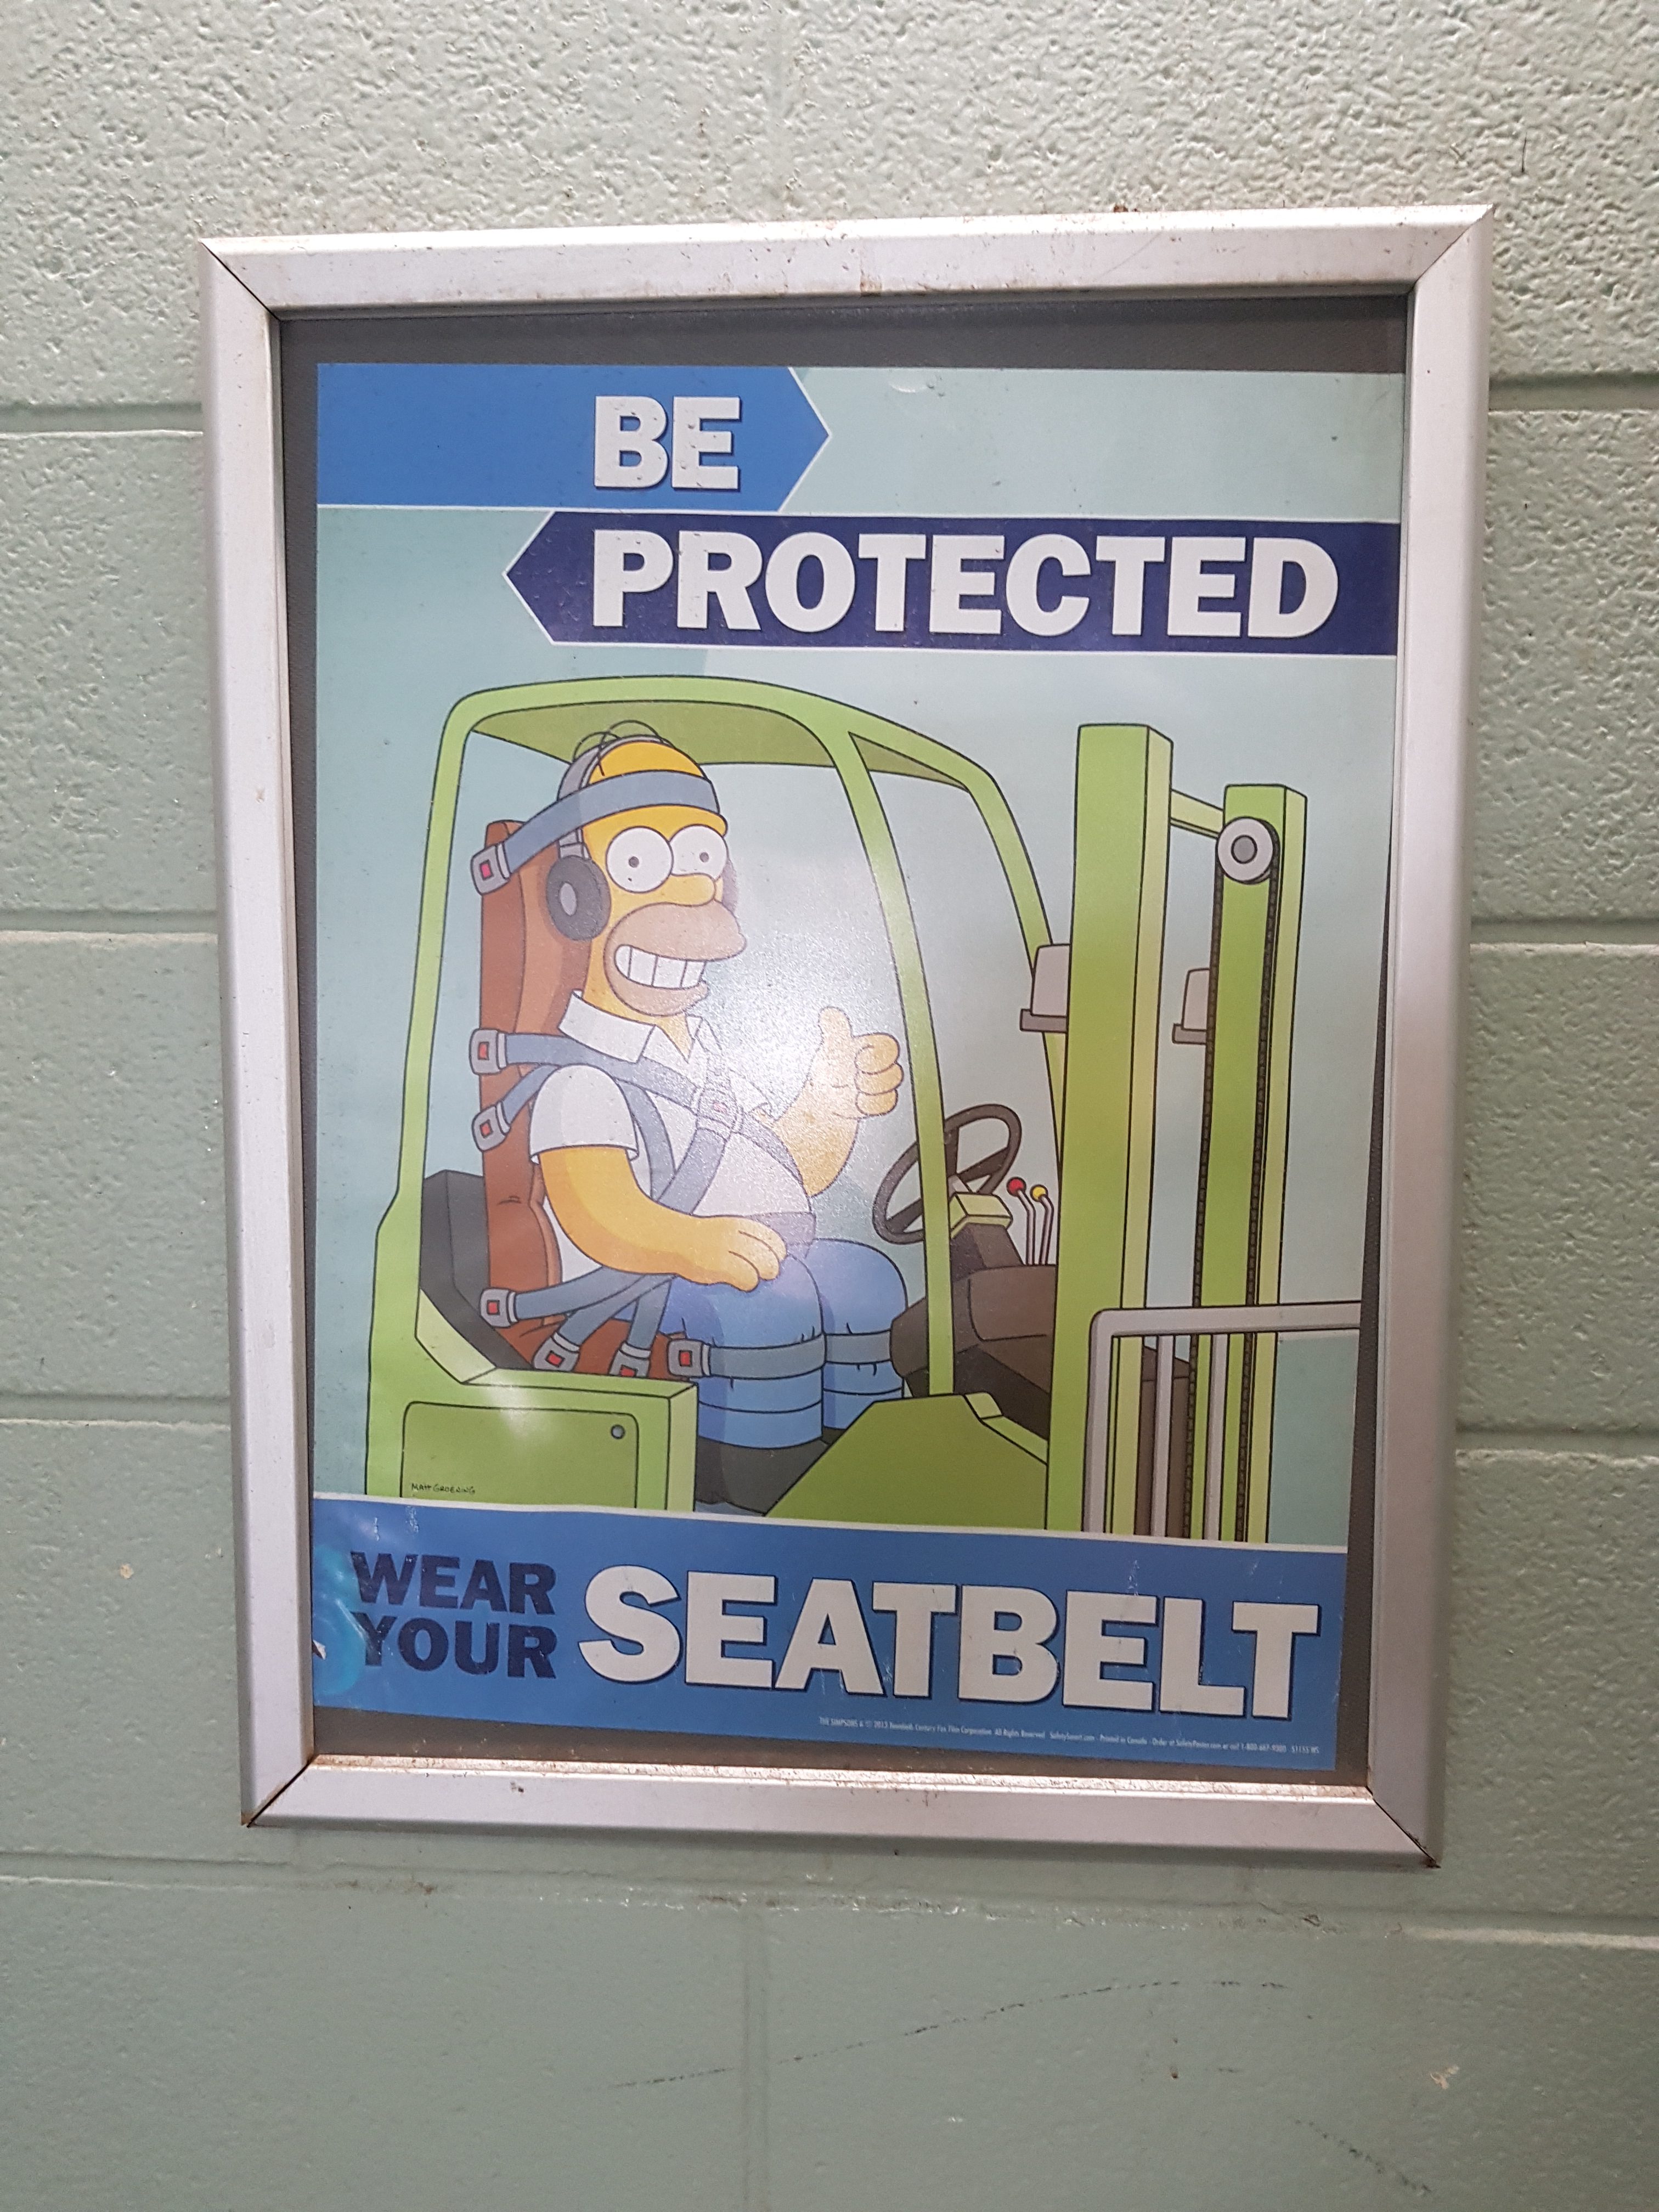 comedic poster about wearing your seatbelt